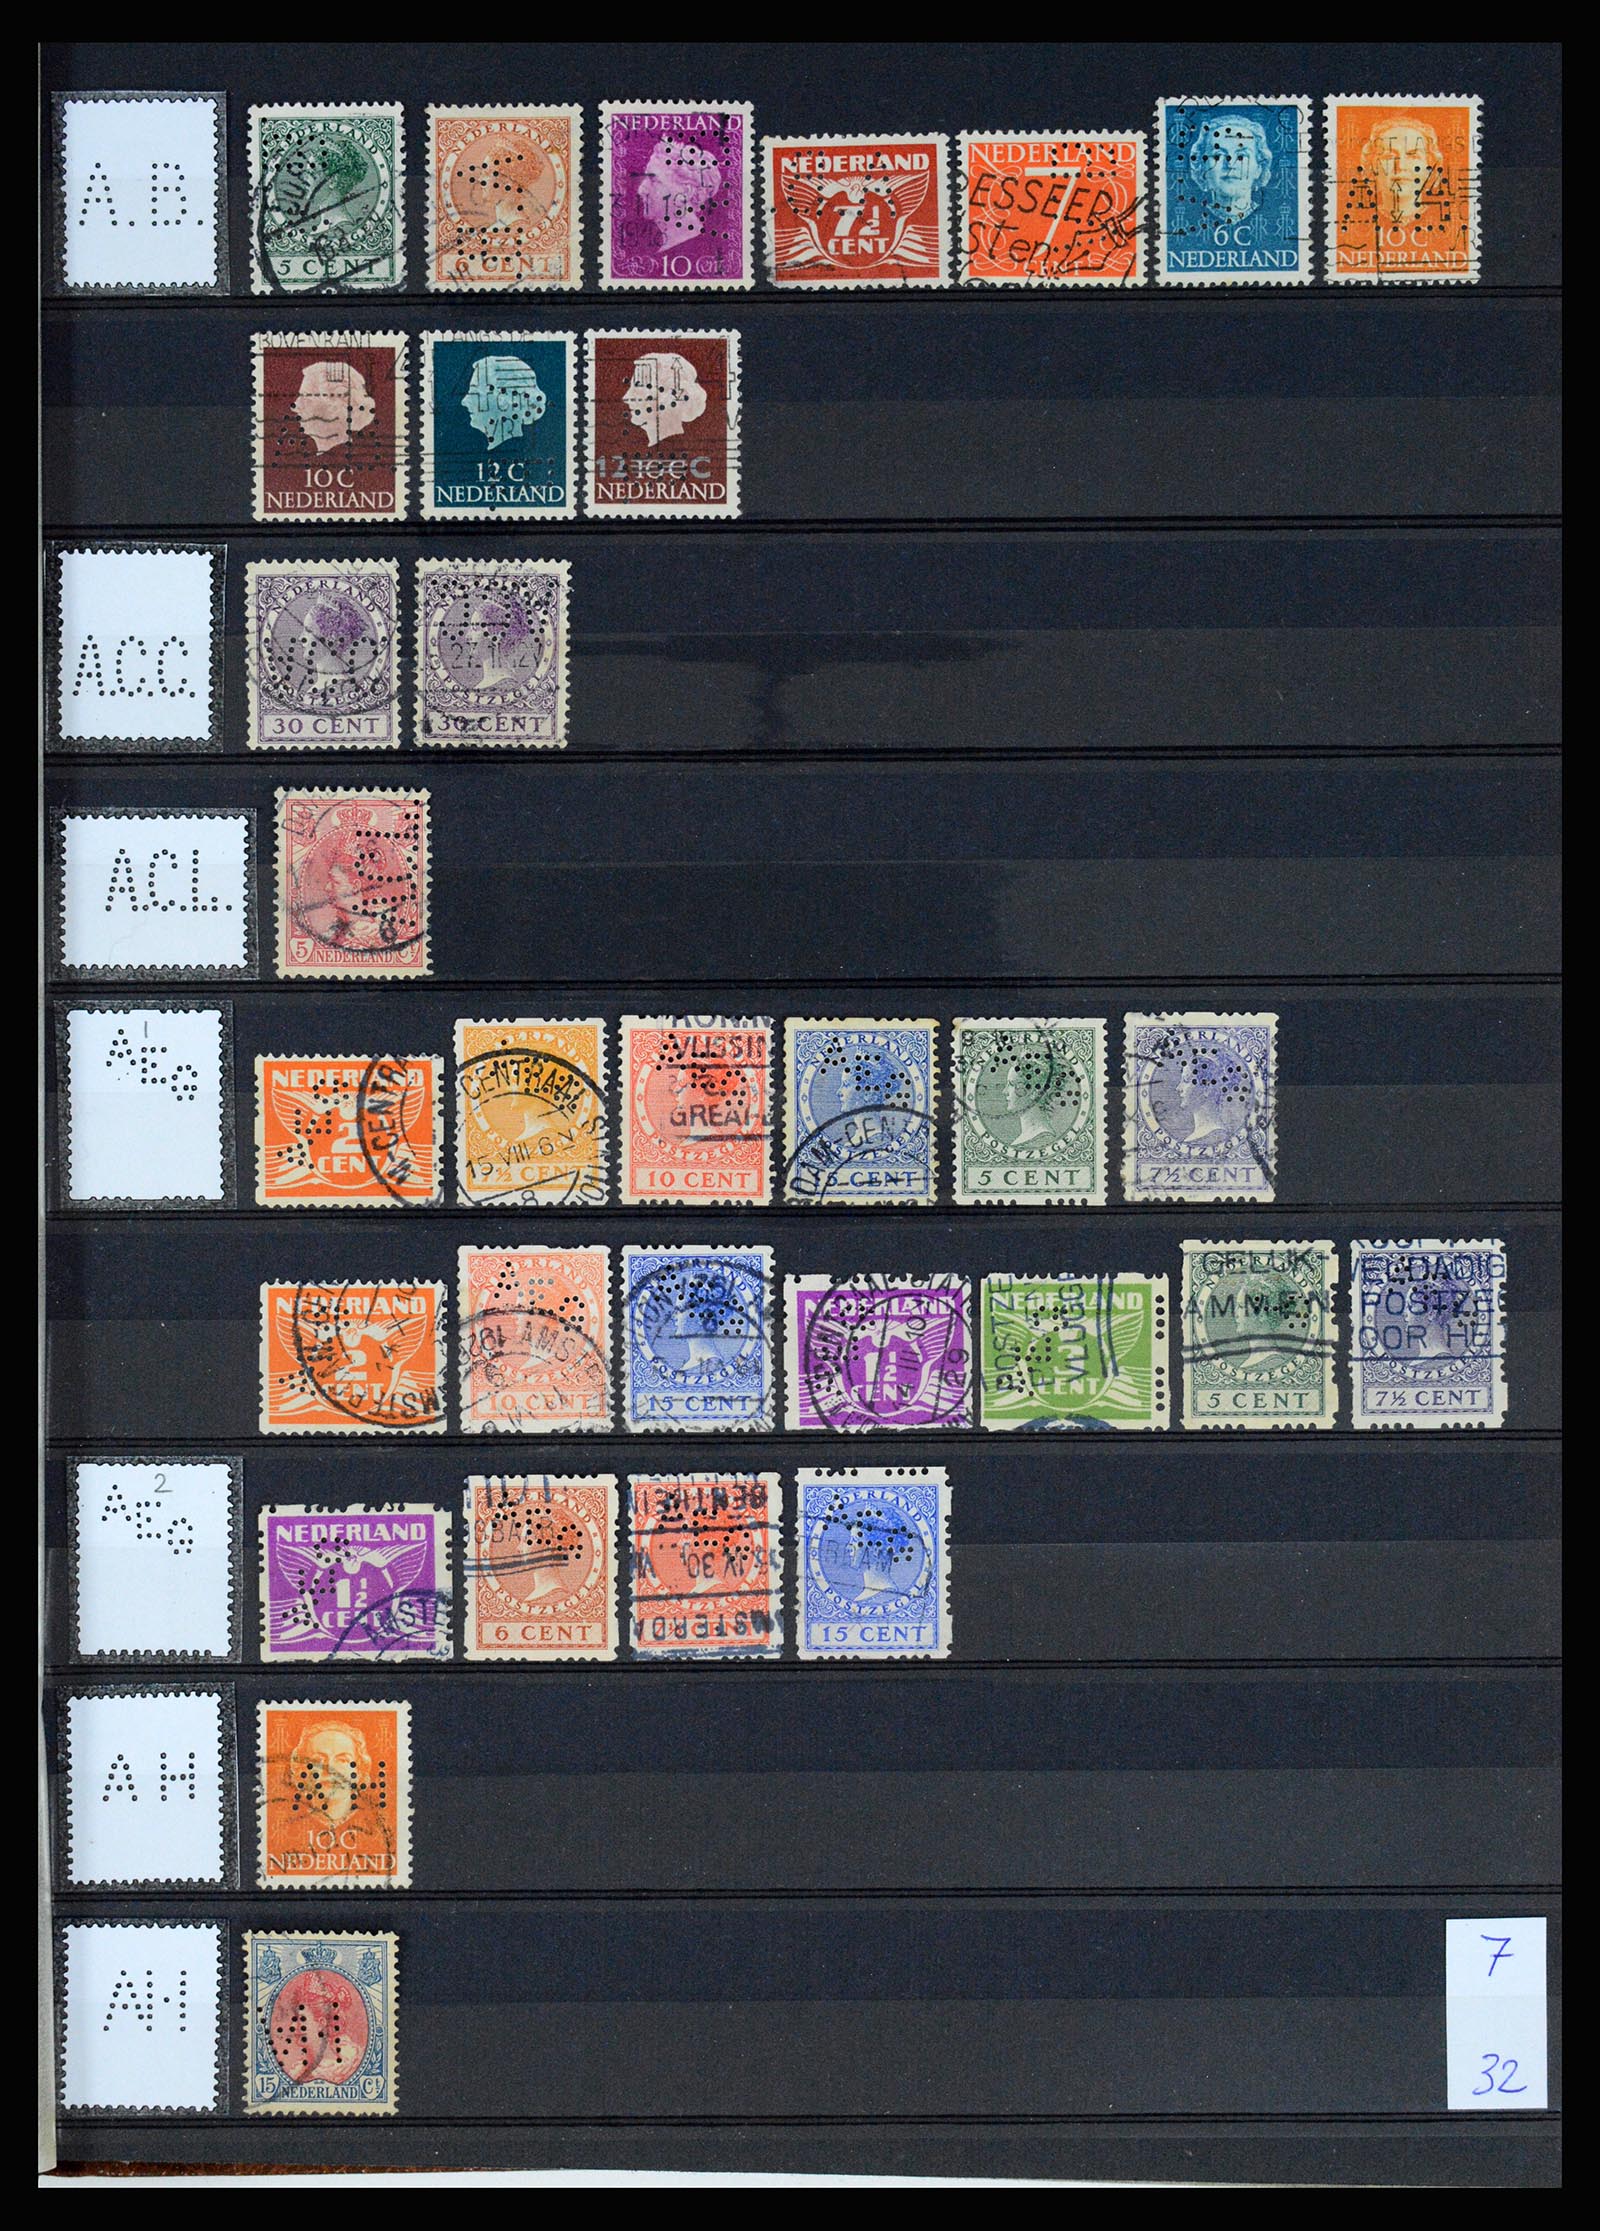 37183 002 - Stamp collection 37183 Netherlands perfins 1872-1960.